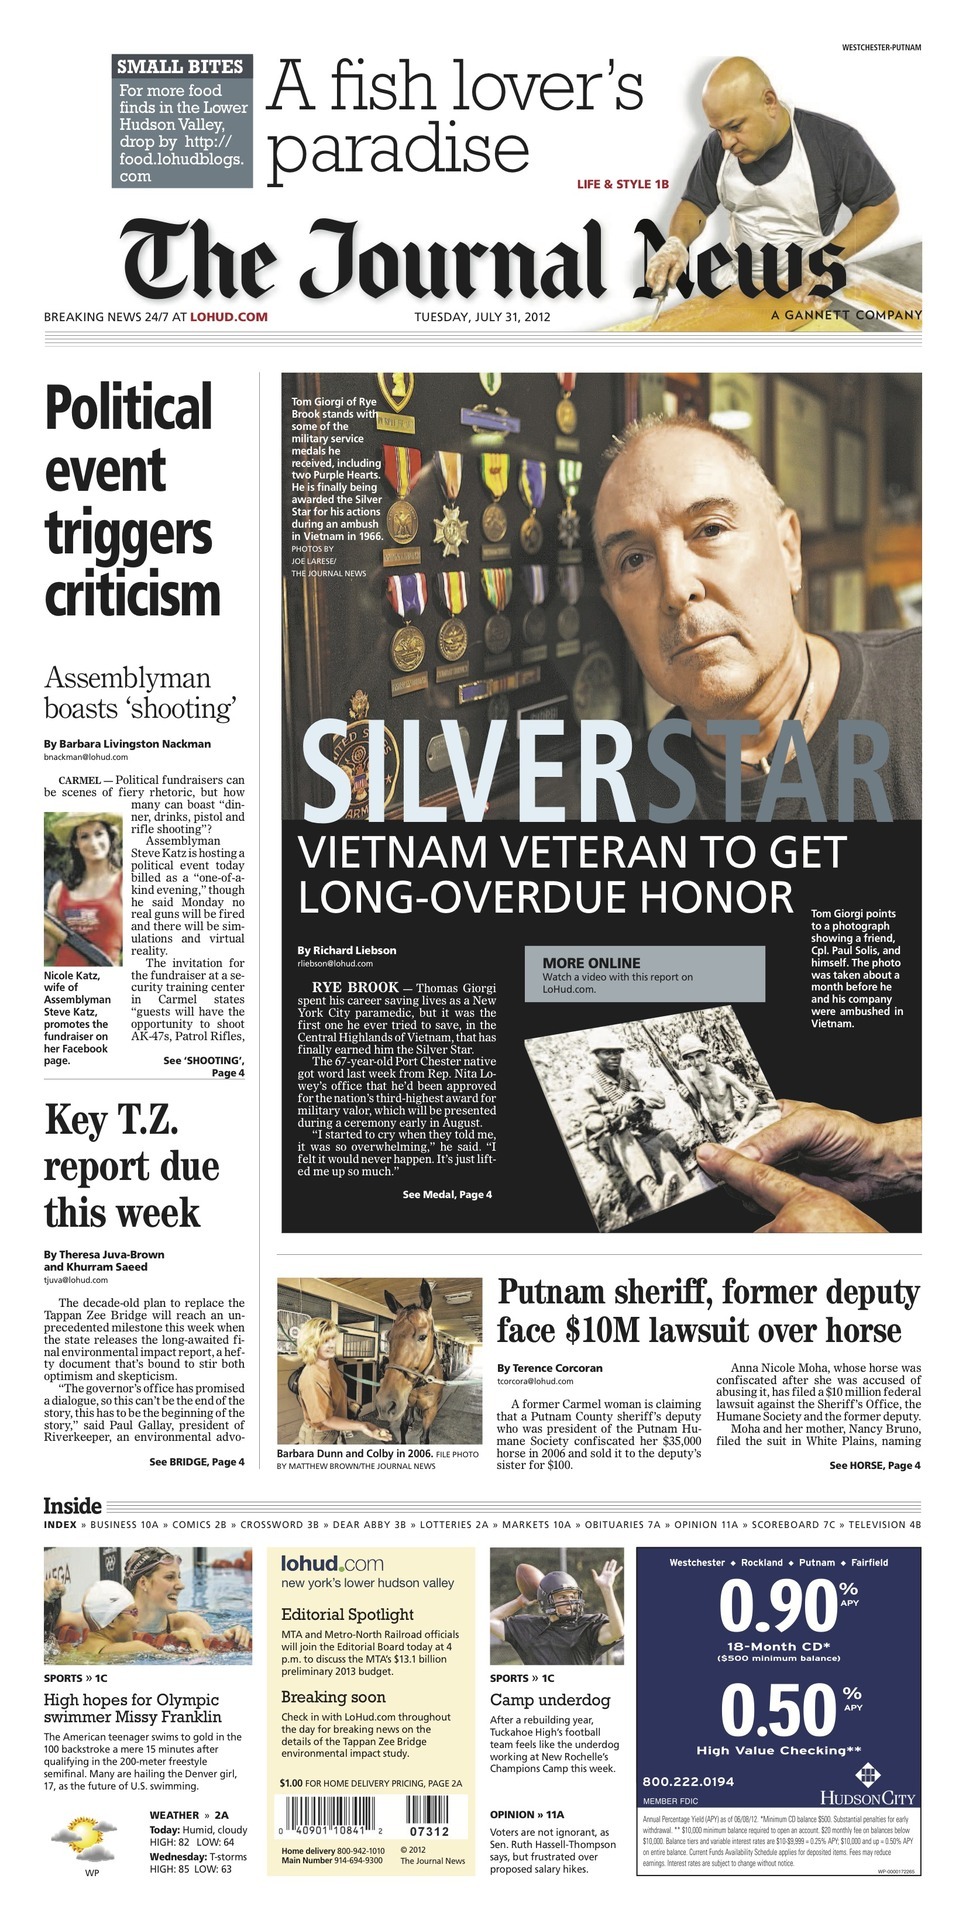 Newsprint on the digital front:
SILVER STAR: VIETNAM VETERAN TO GET LONG-OVERDUE HONOR
Political event triggers criticism
Key T.Z. report due this week
Putnam sheriff, former deputy face $10M lawsuit over horse